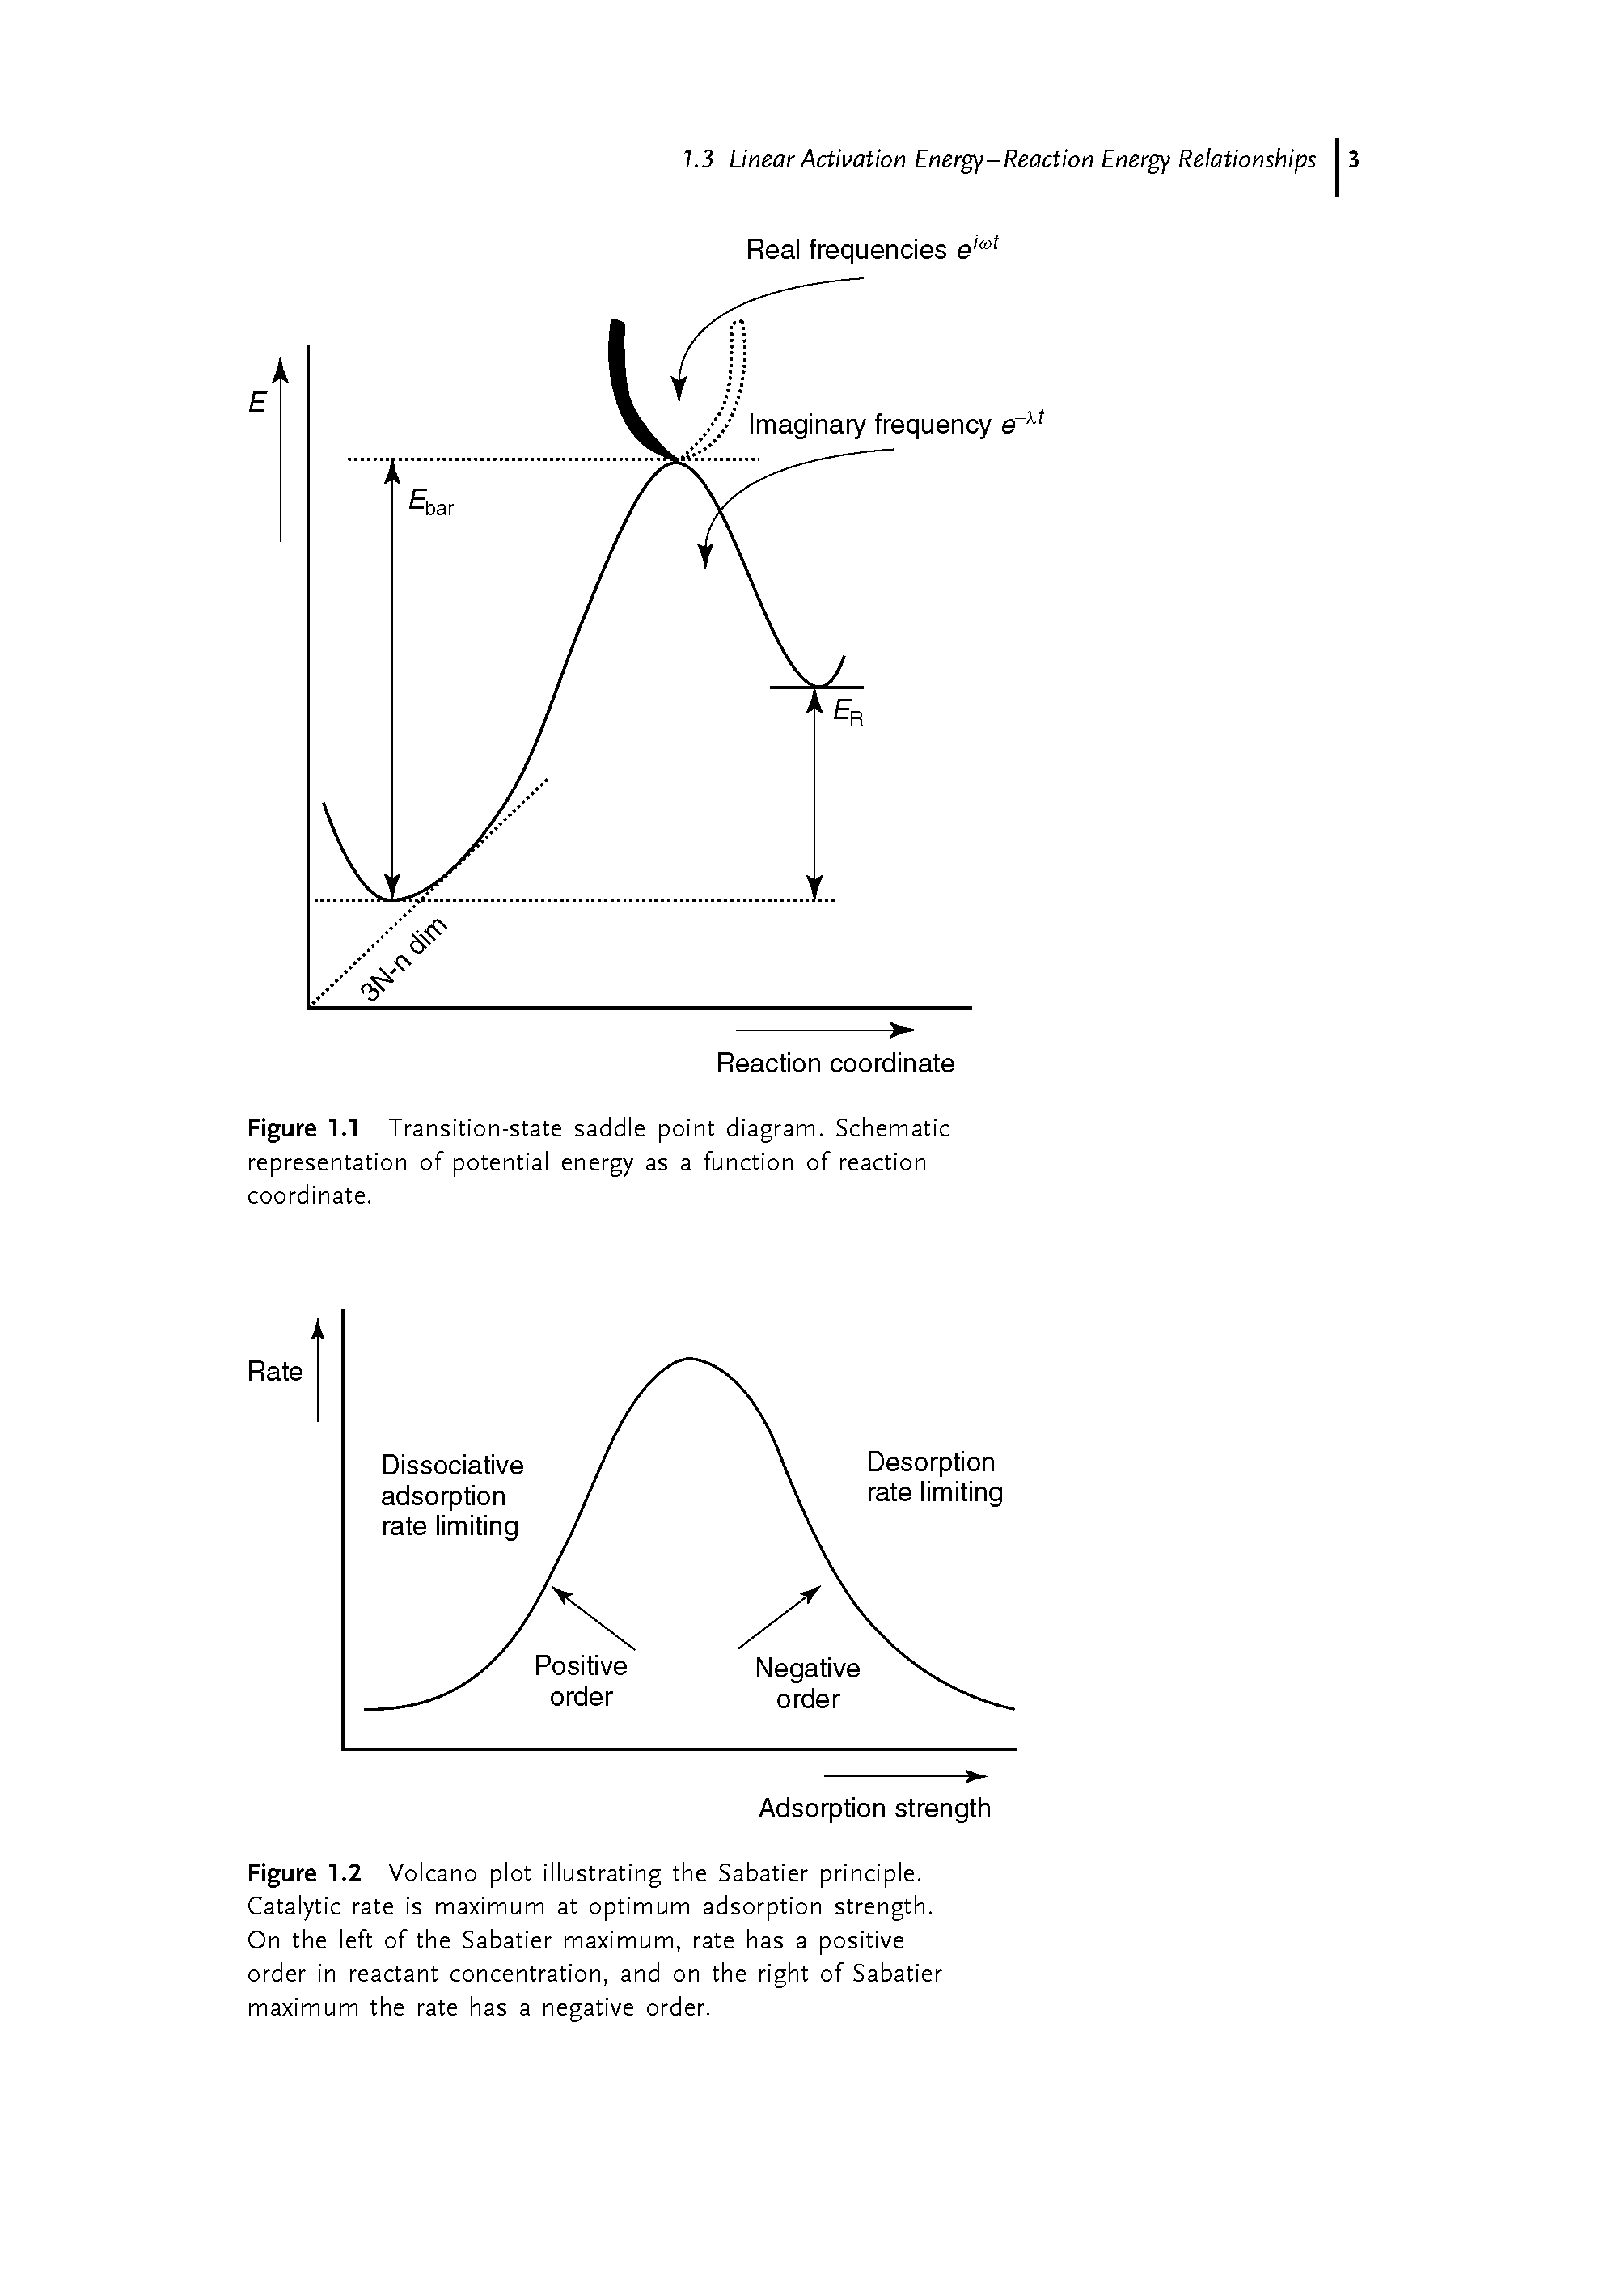 Figure 1.1 Transition-state saddle point diagram. Schematic representation of potential energy as a function of reaction coordinate.